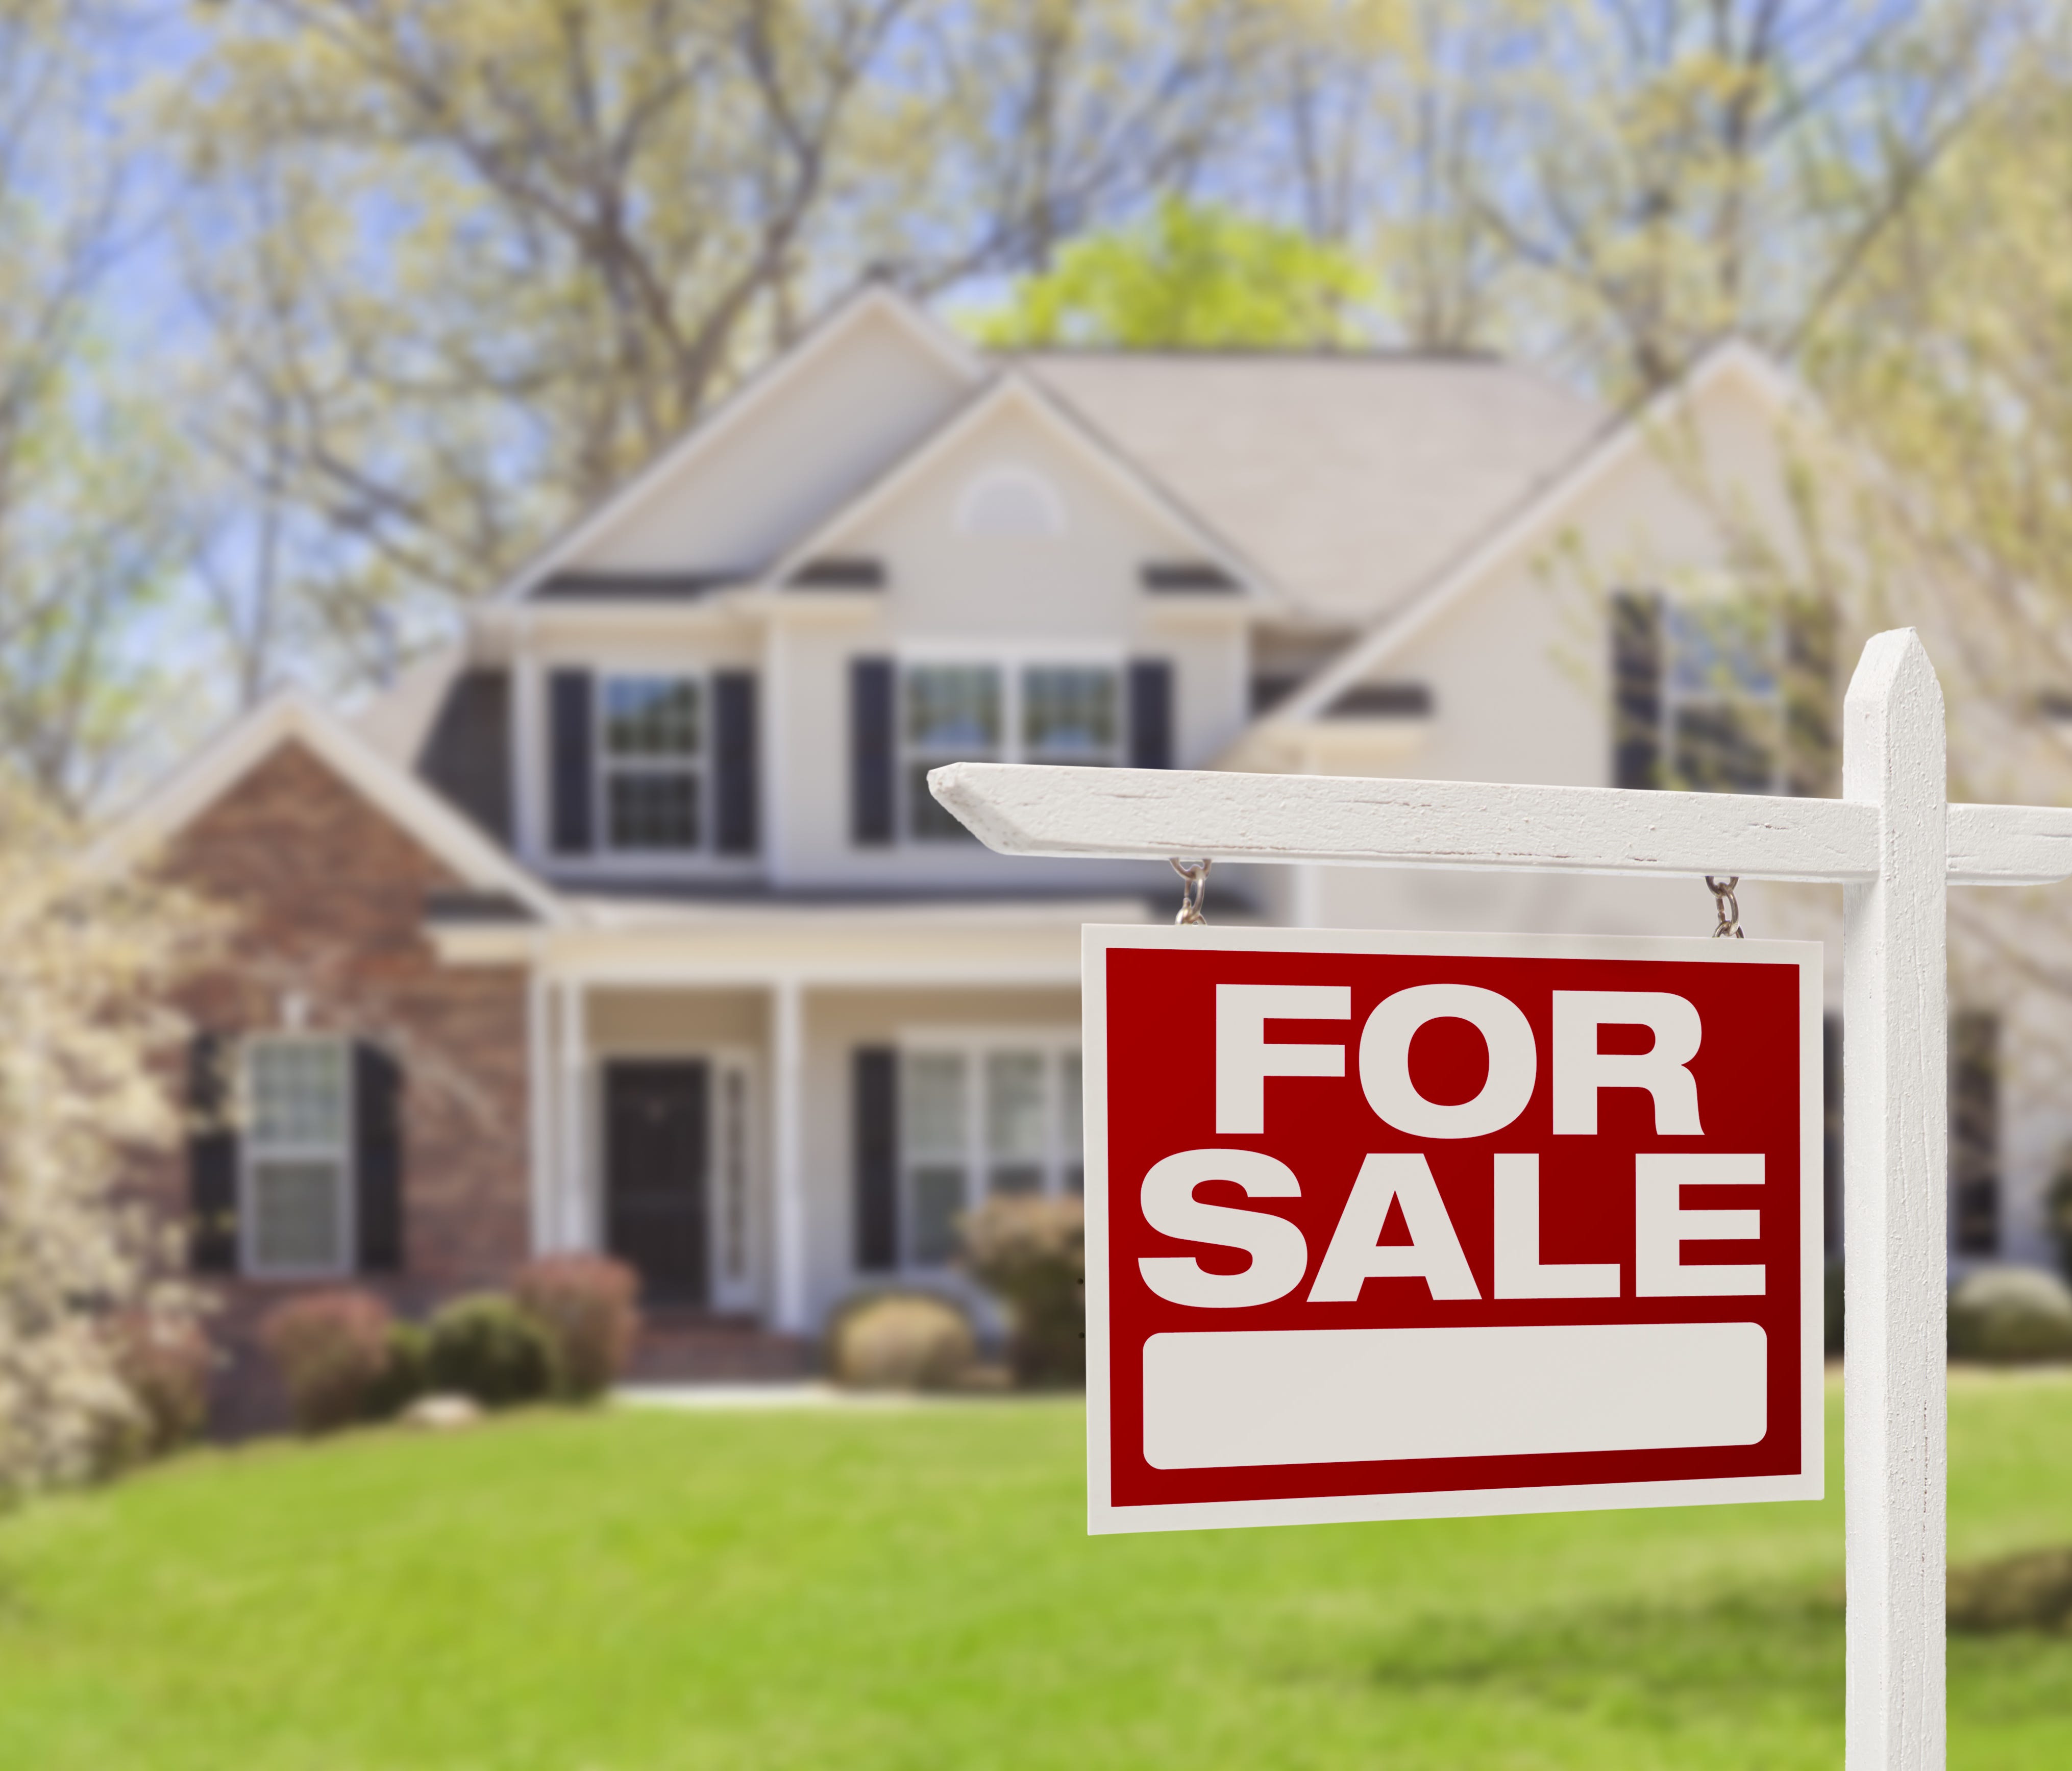 Pending home sales are up according to a new report.